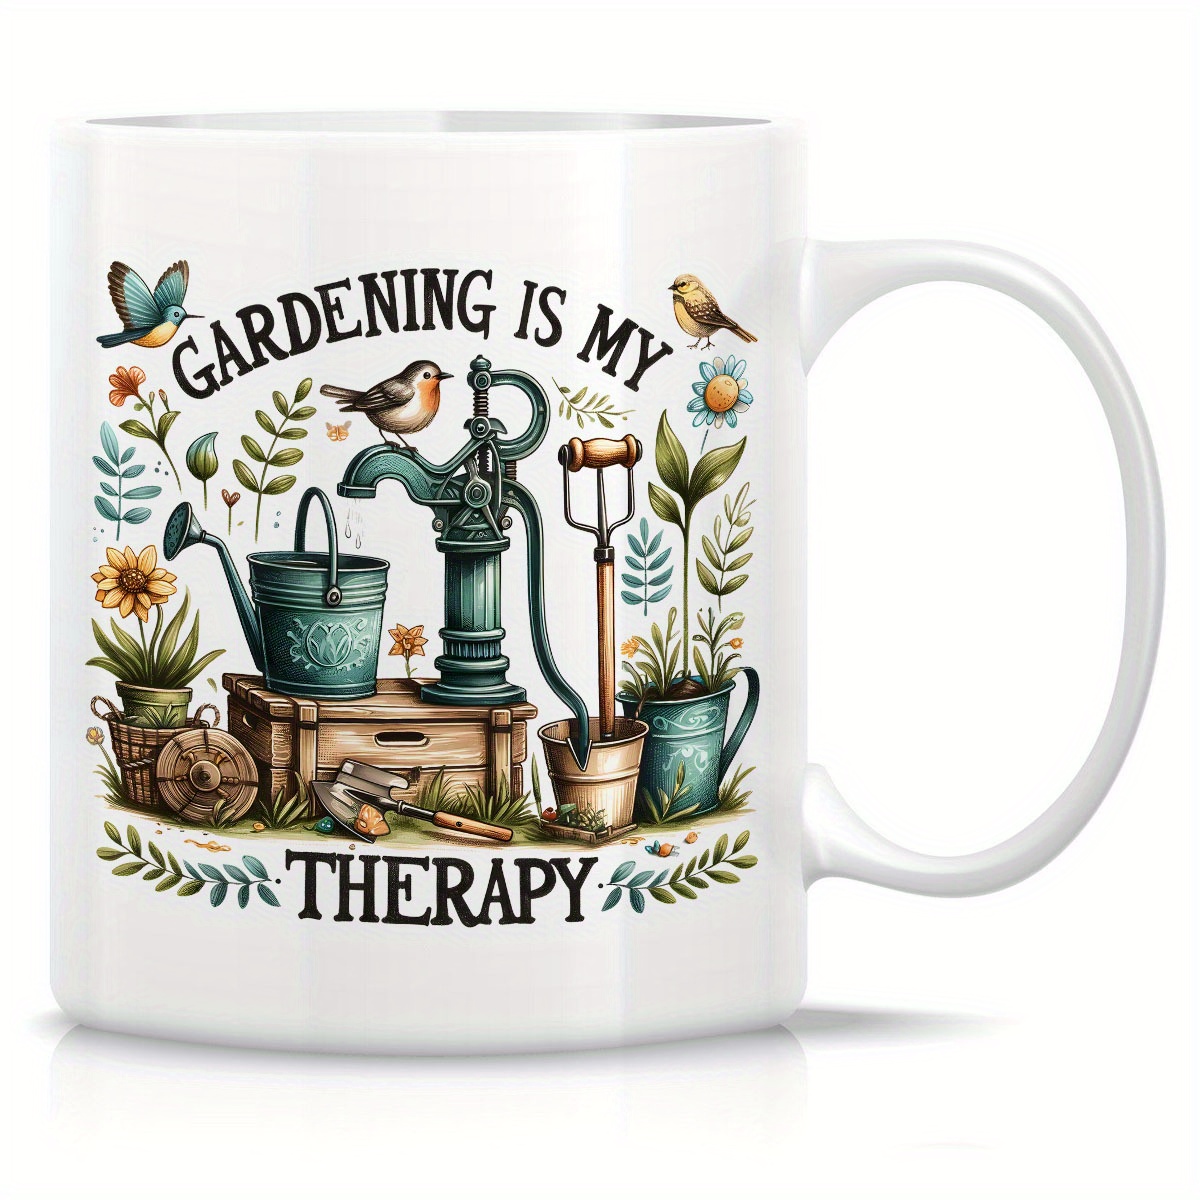 

1pc, Gardening Is My Therapy Mug Funny Coffee Mug Double Side Printed Coffee Mug - Gifts For Ts Merchandise - Novelty Coffee Mug, 11 Ounce Gifts For Friends, Coworkers, Siblings, Dad, Mom,daguhter